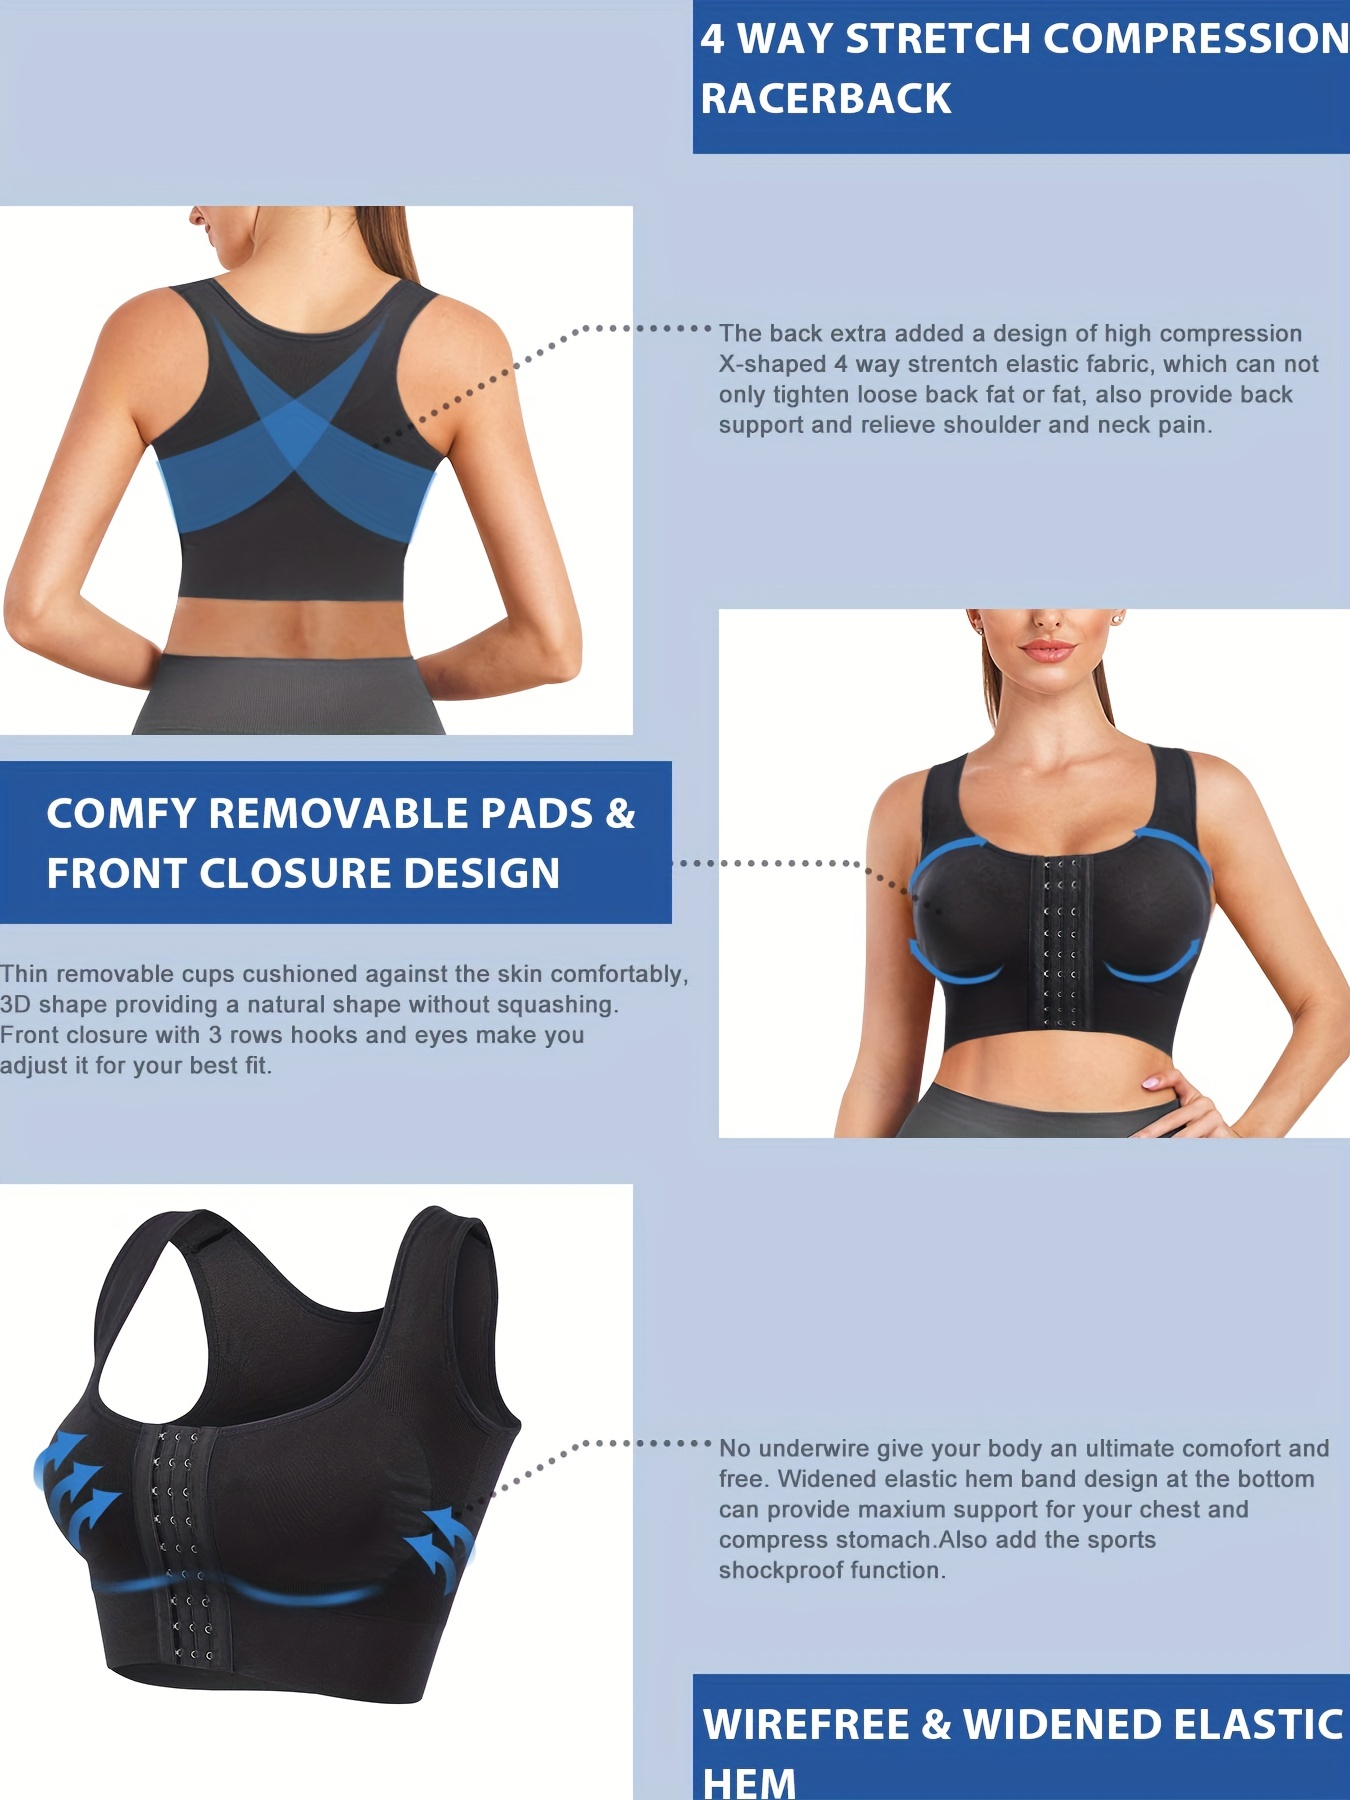 Compression Wirefree High Support Bra Exercise And Offers Back Support